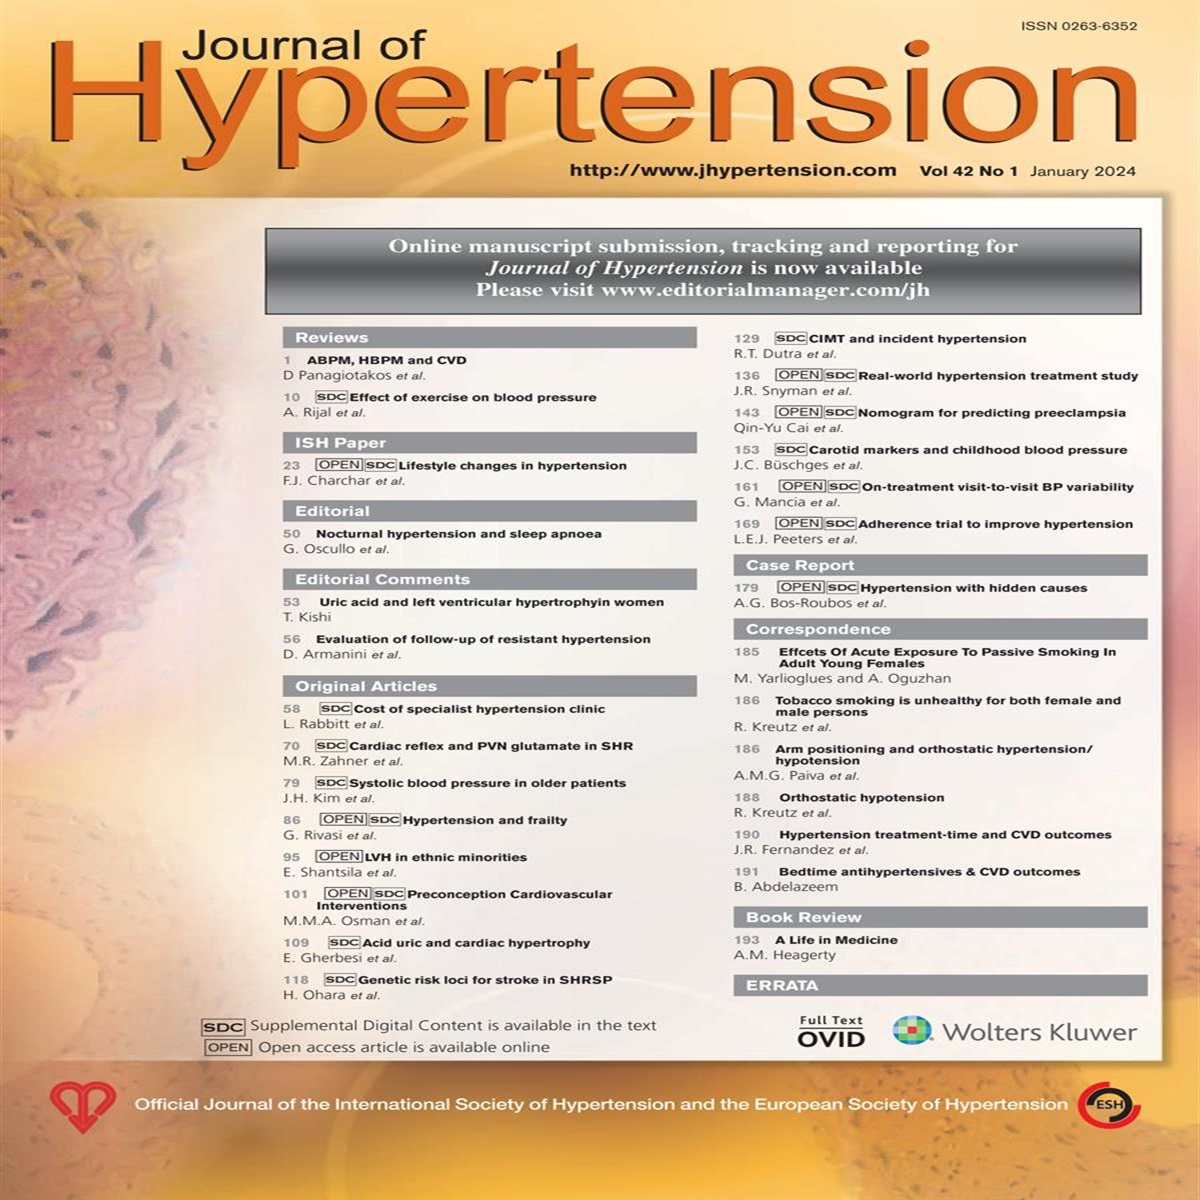 Authors’ response to “Impact of hypertension treatment-time on cardiovascular outcomes: erroneous trial selection leading to suspect findings”